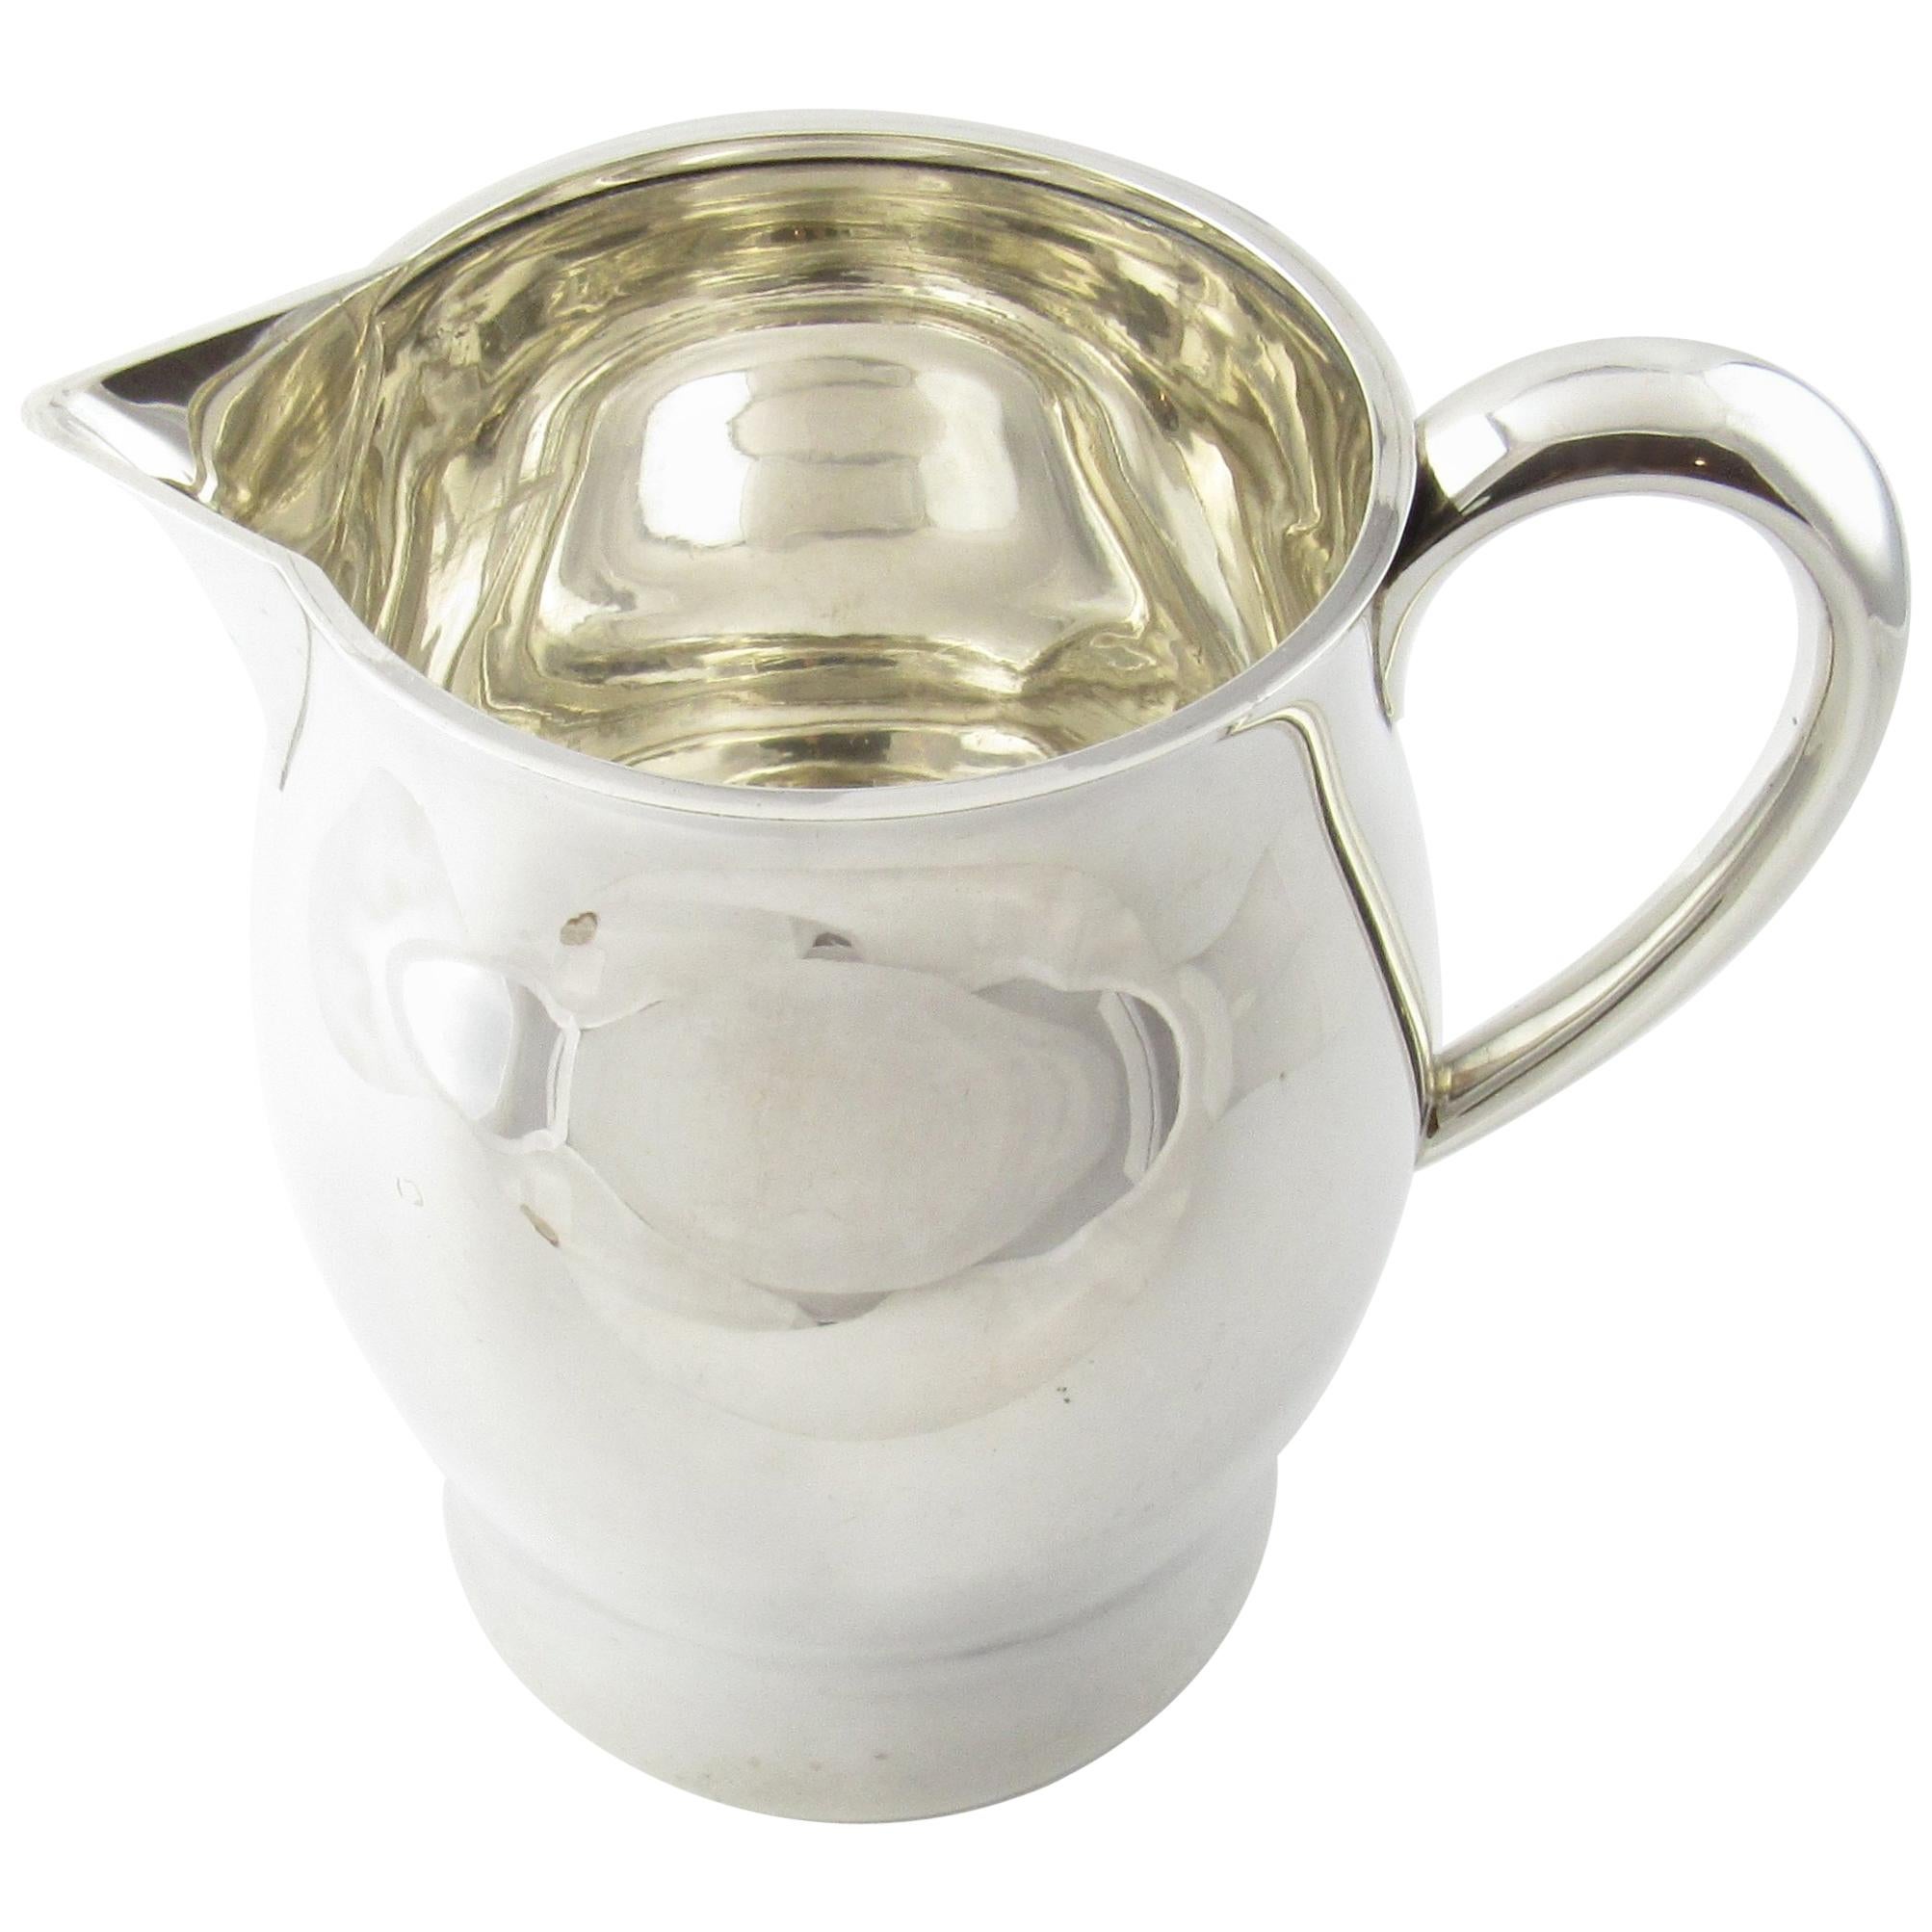 Tiffany & Co. P. Revere Reproduction Sterling Silver Pitcher 3 1/2 Pints